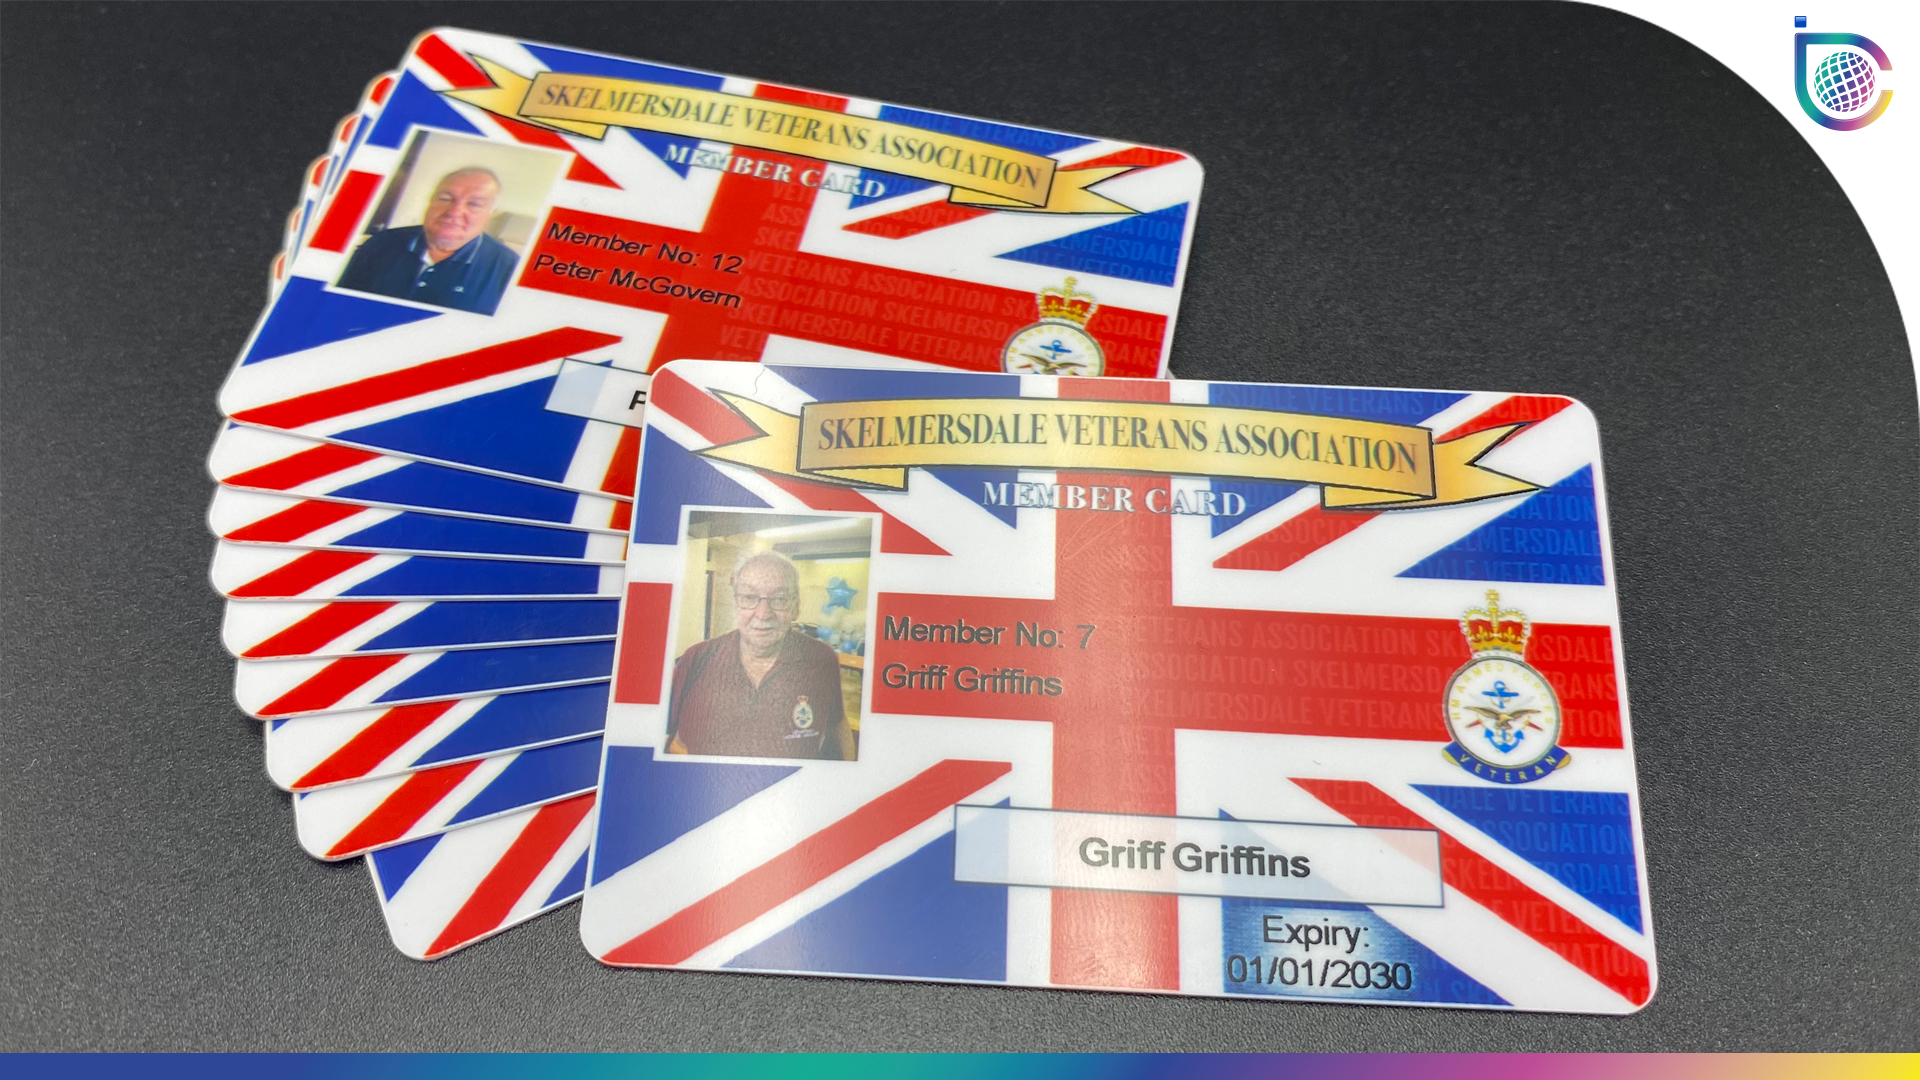 Incodia proud to produce the Skelmersdale Veterans Association photo ID cards